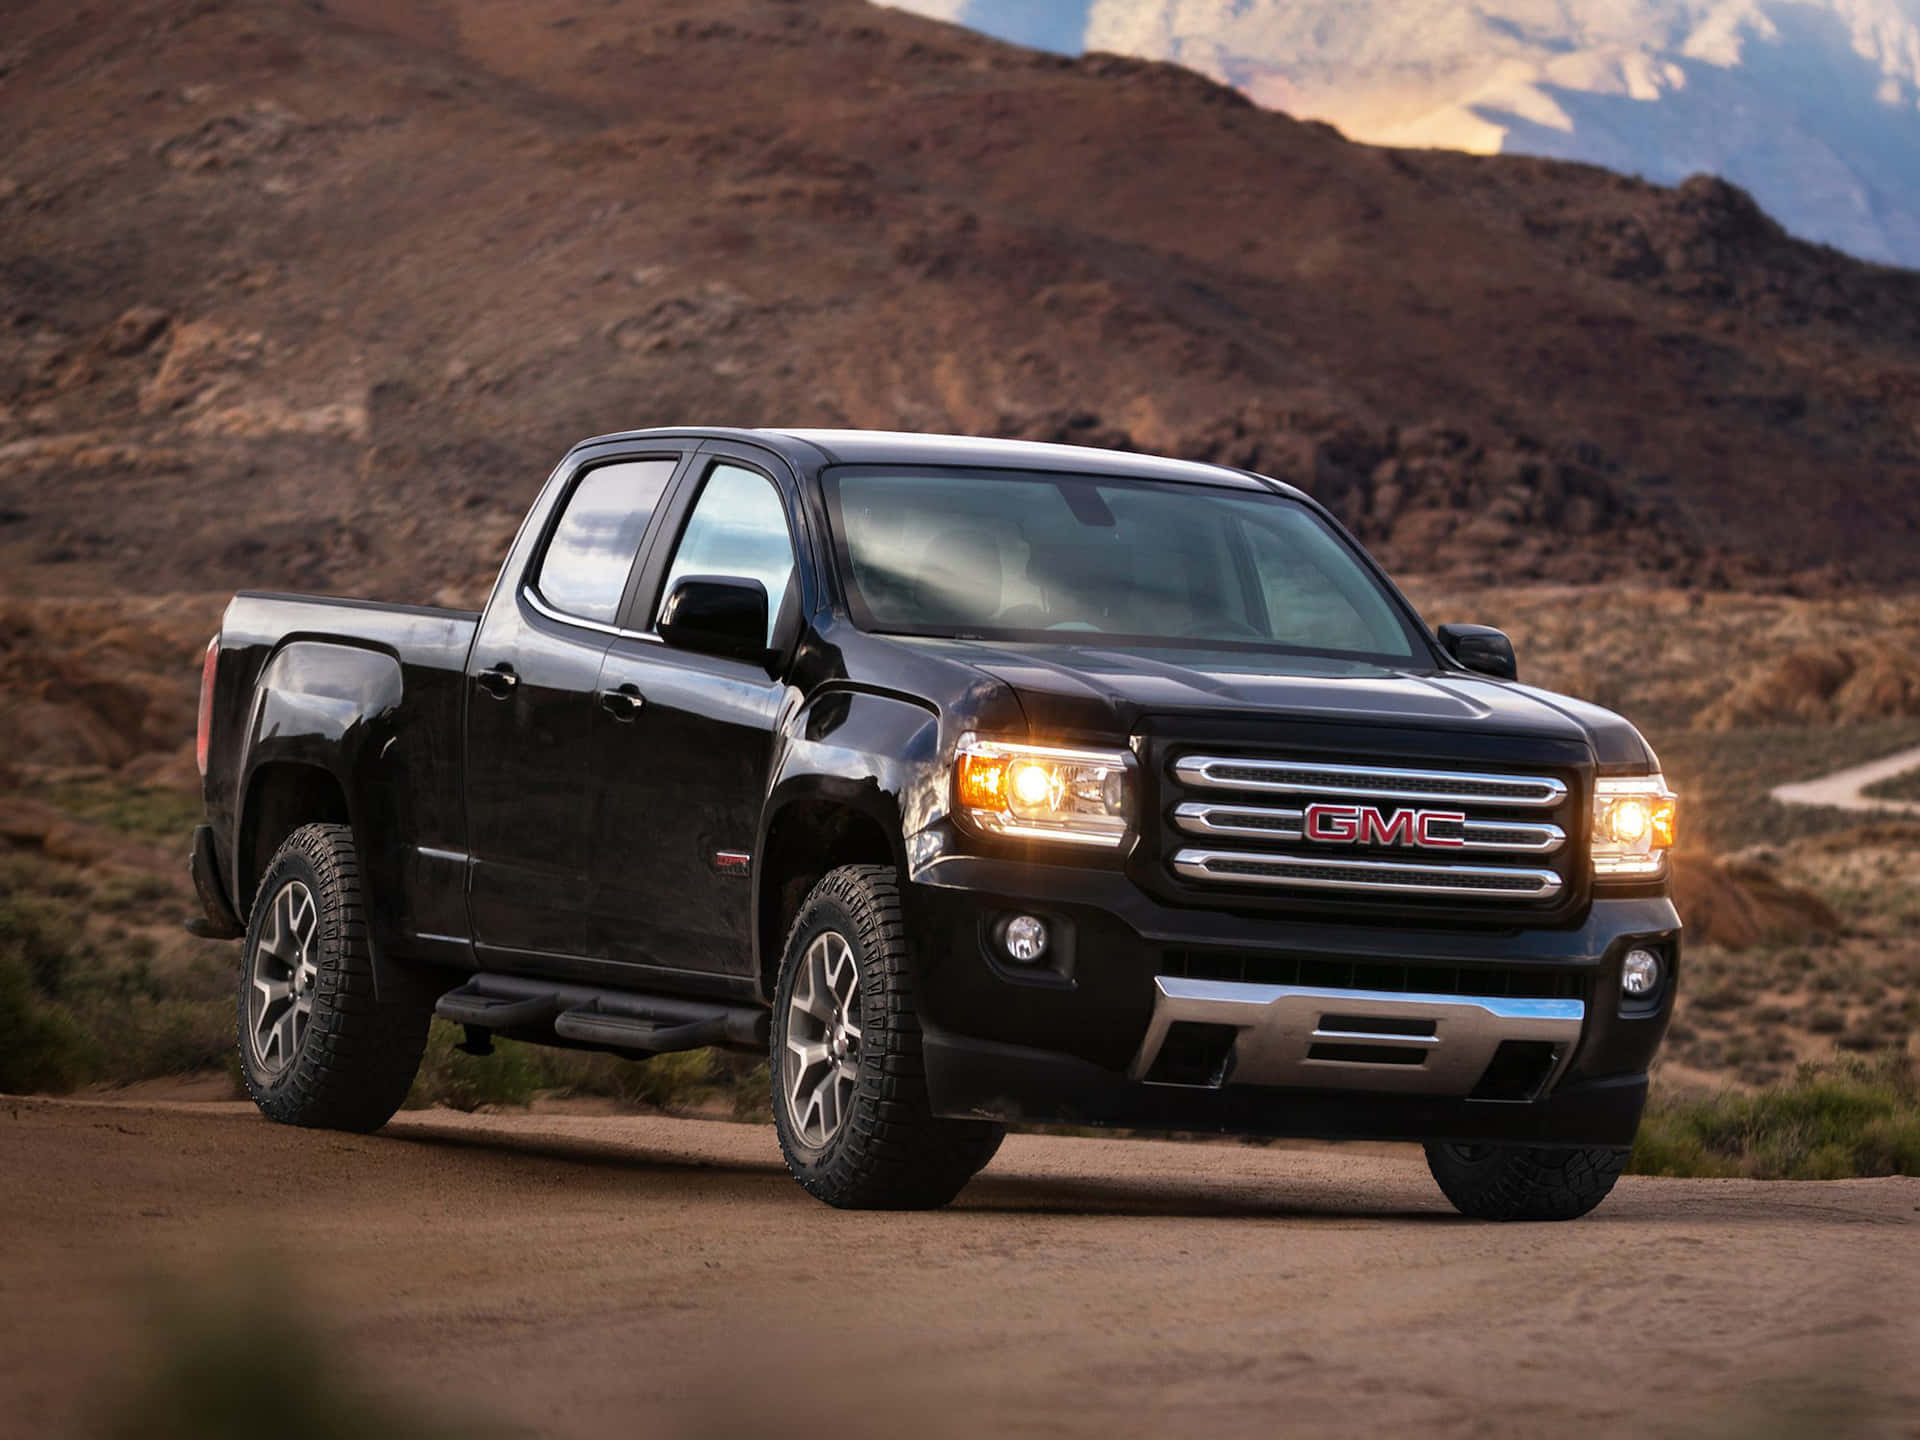 Sleek and Rugged GMC Canyon on the Road Wallpaper